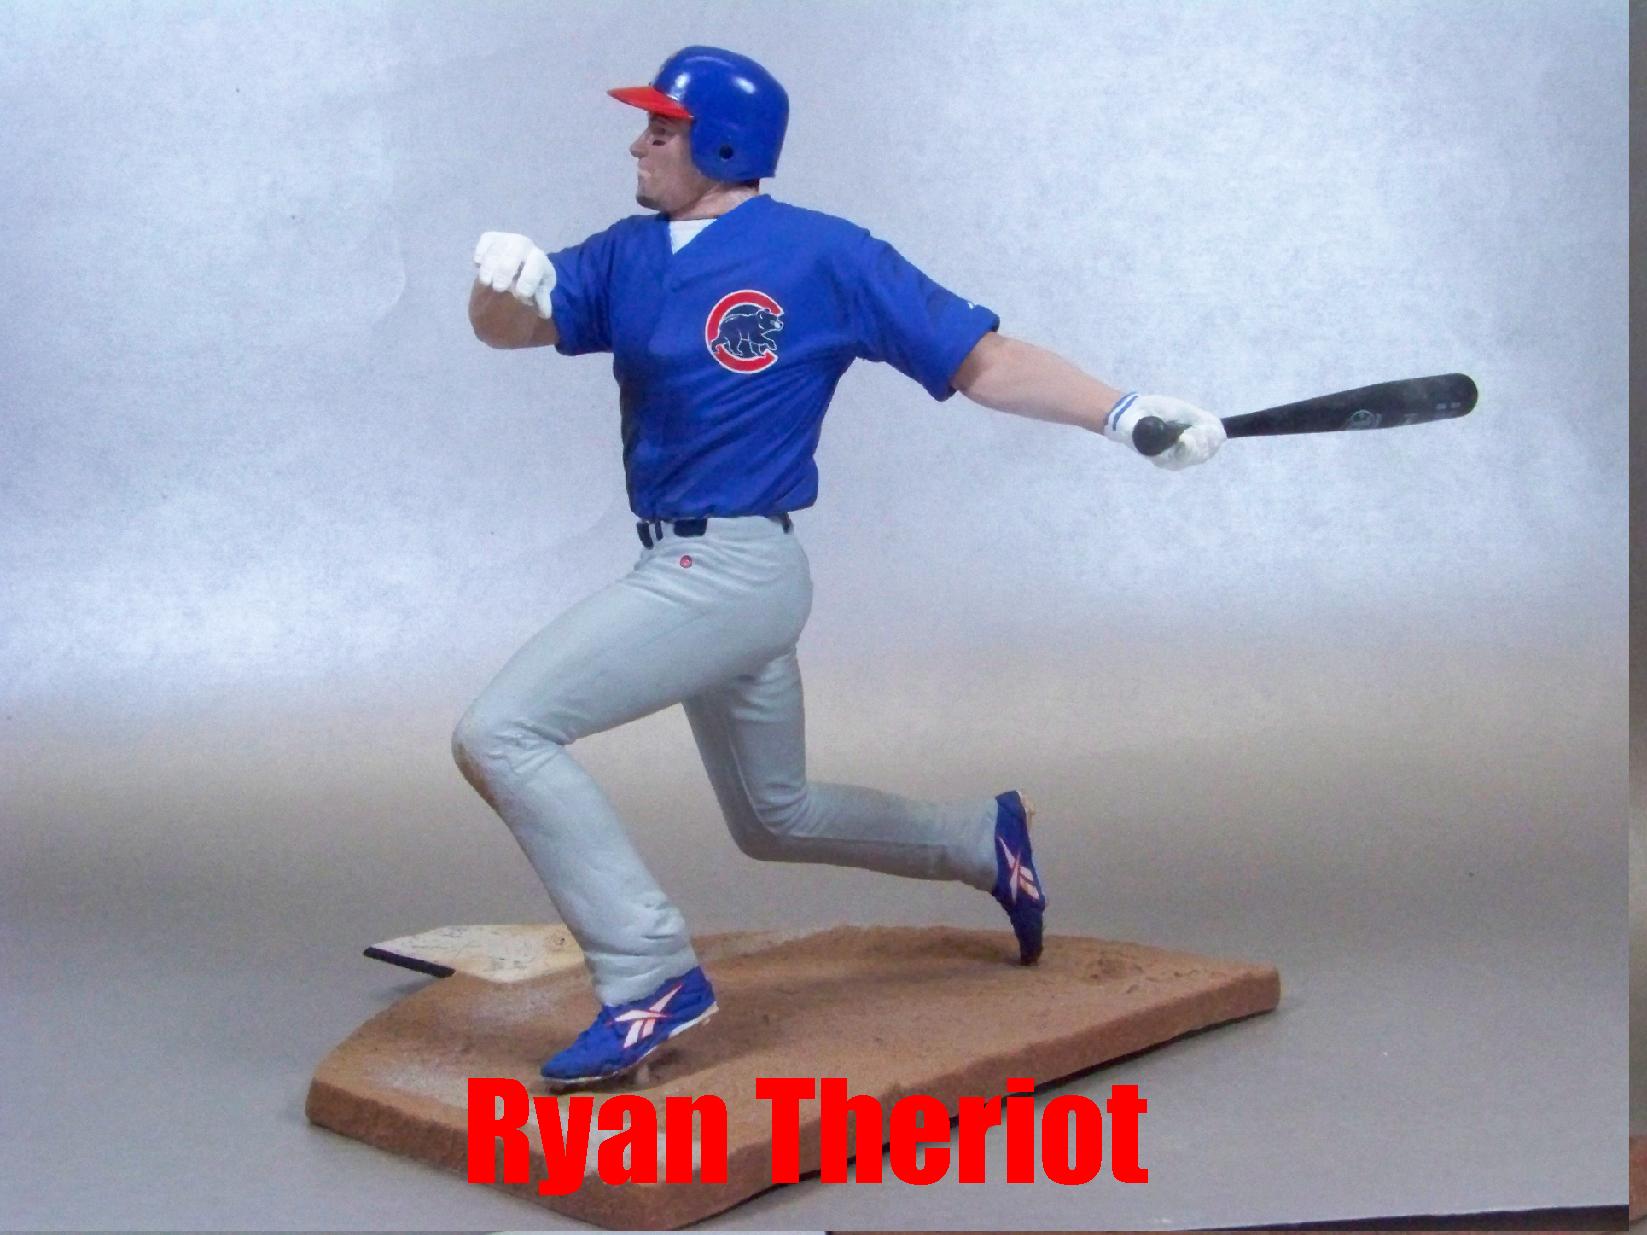 theriot1.jpg